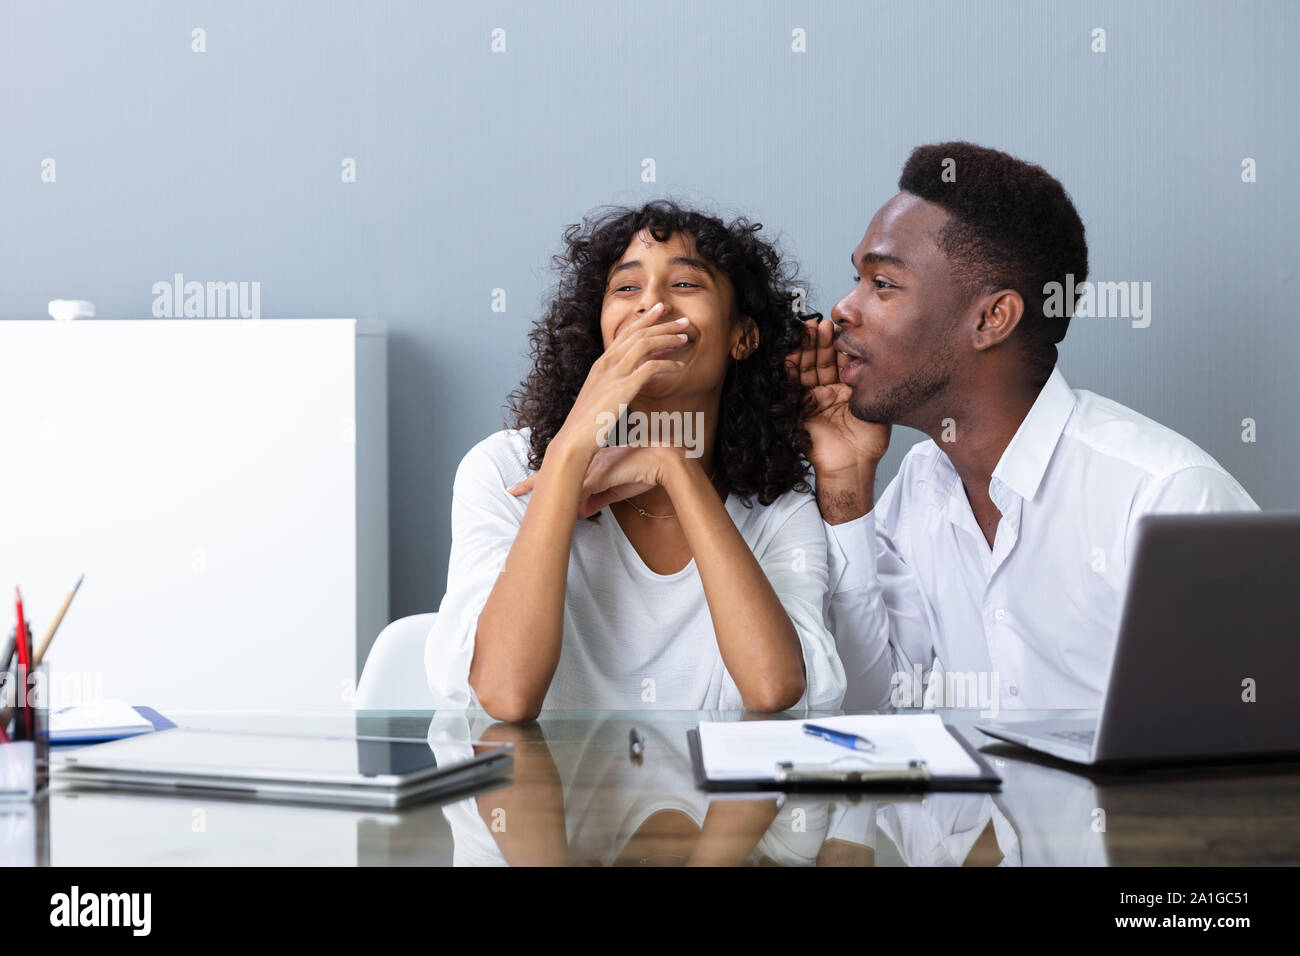 People Laughing About Their Coworker In Office Stock Photo